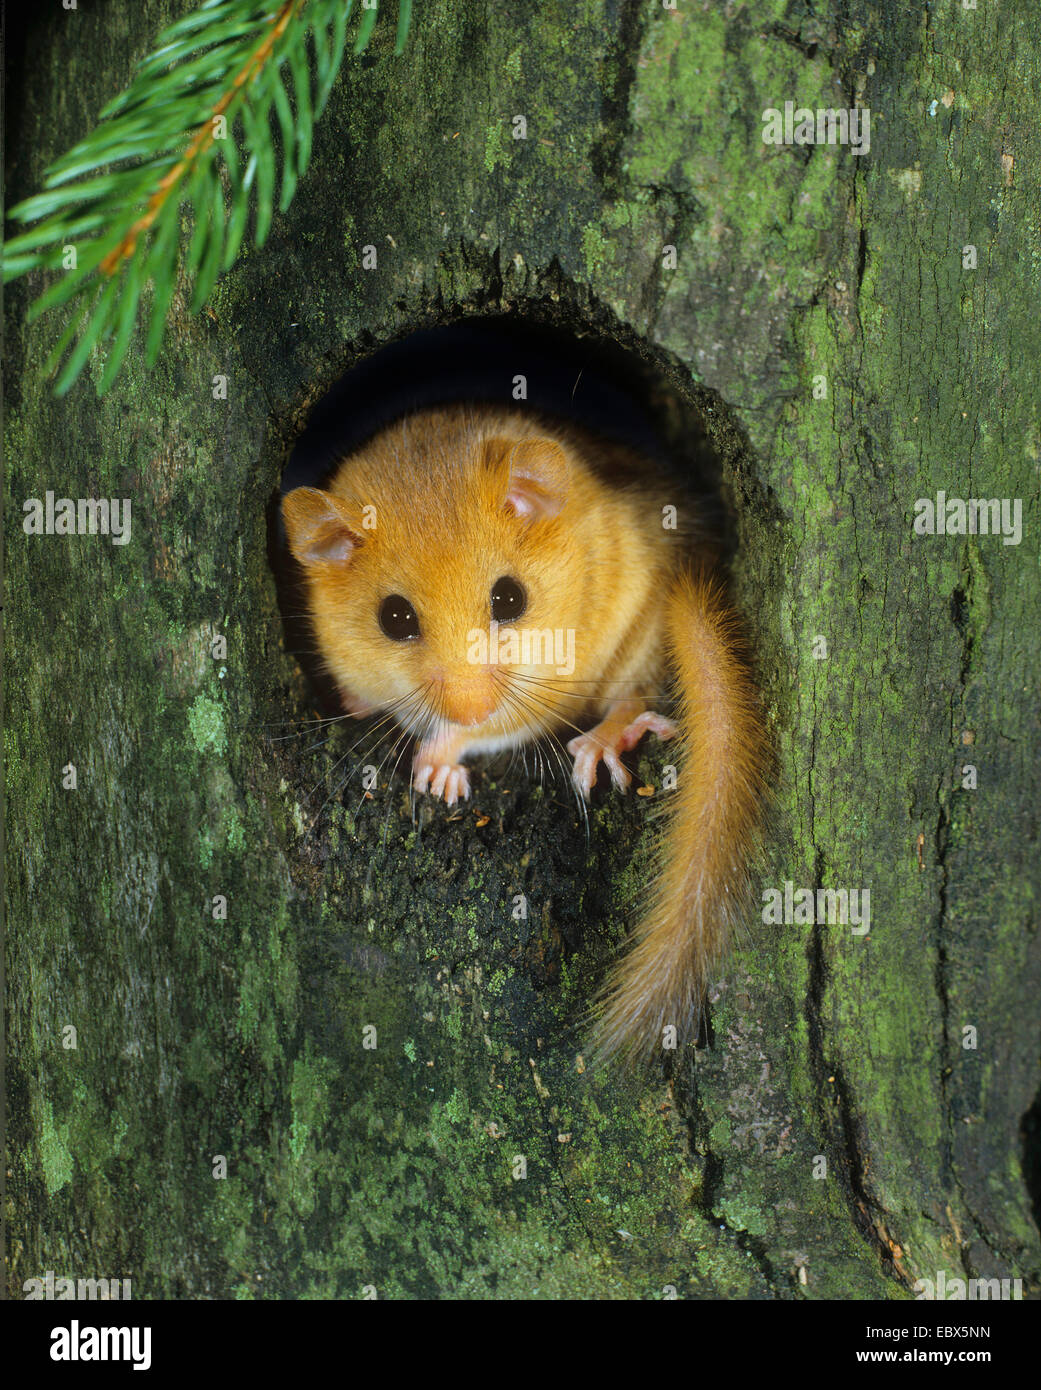 common dormouse, hazel dormouse (Muscardinus avellanarius), looking out of a tree hole, Germany Stock Photo